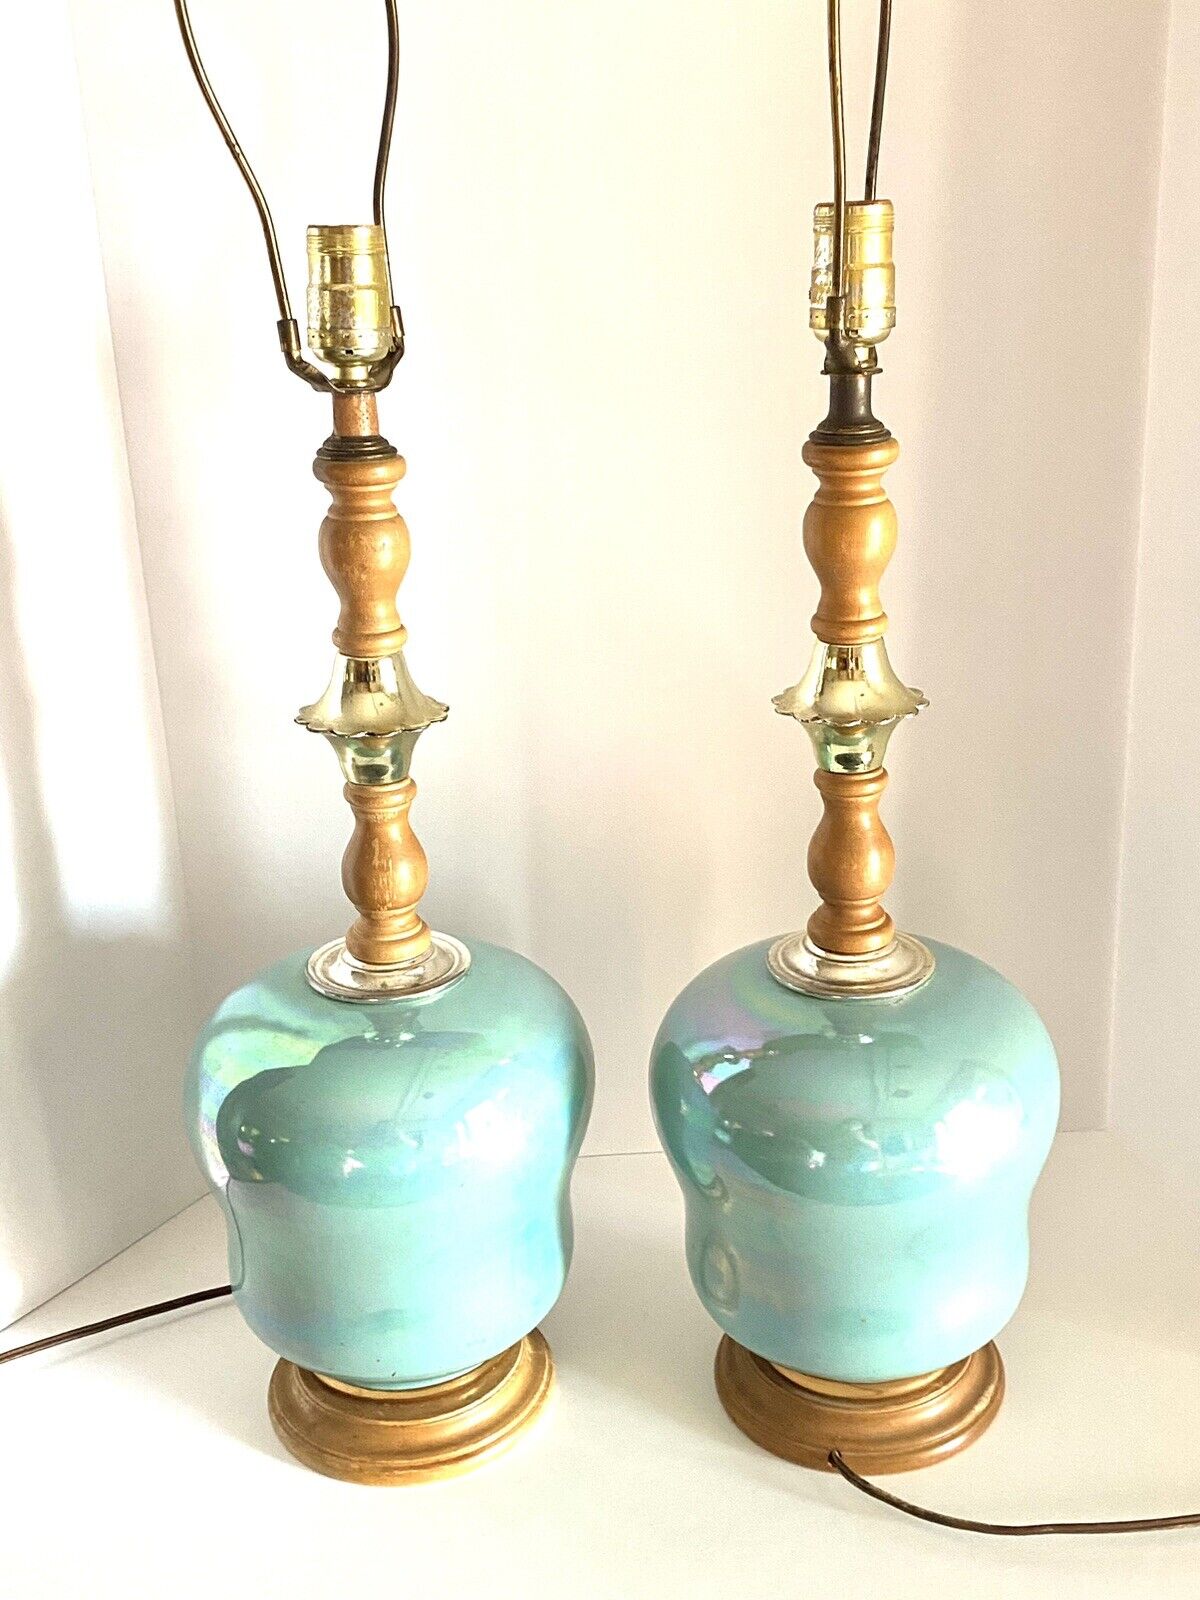 Mid Century Modern Turquoise Glazed Ceramic Table Lamps - No Shades Tested READ